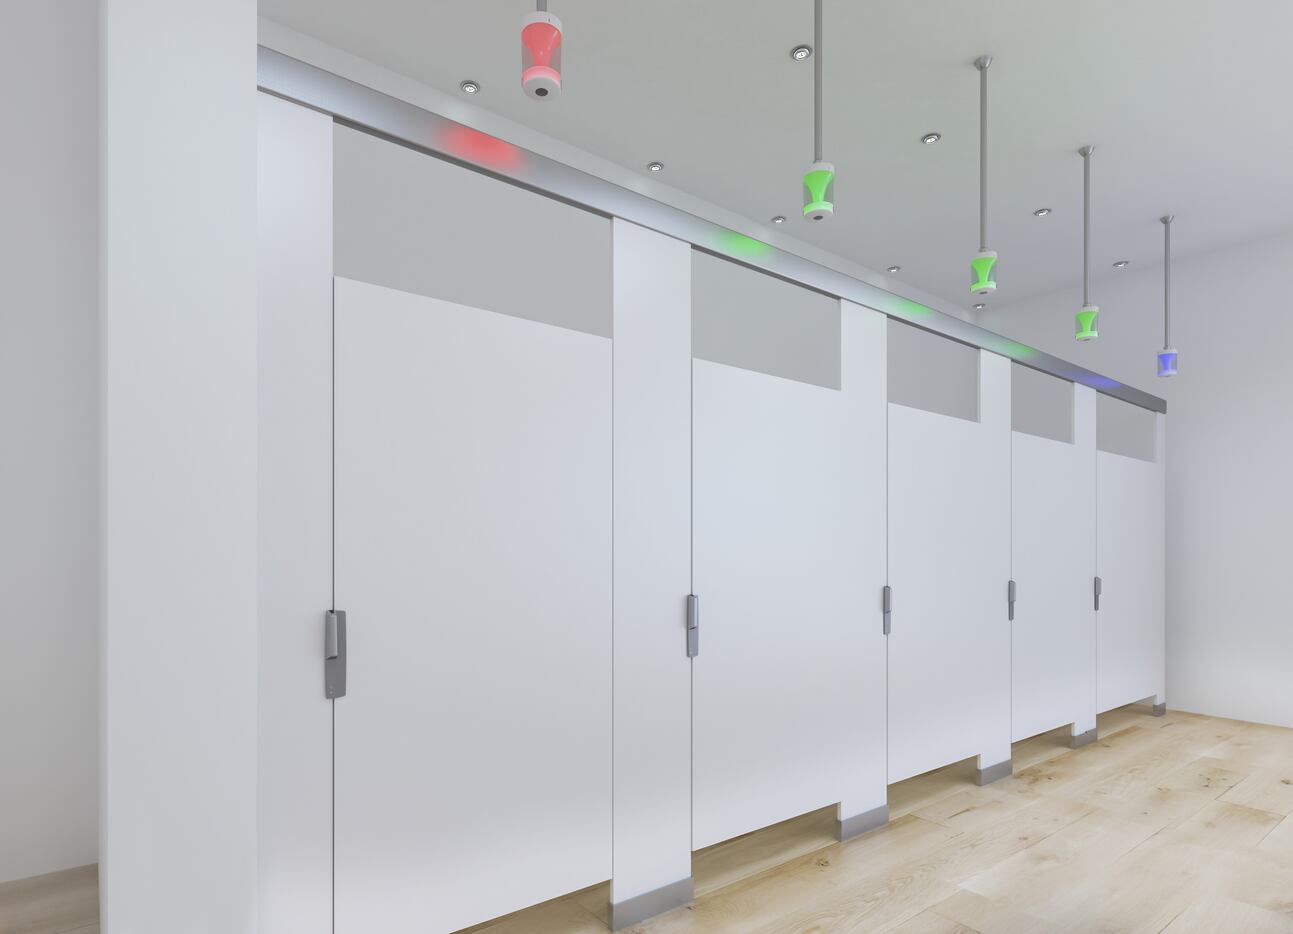 Here's a rendering of Tooshlights' smart restroom traffic system. It uses green and red...